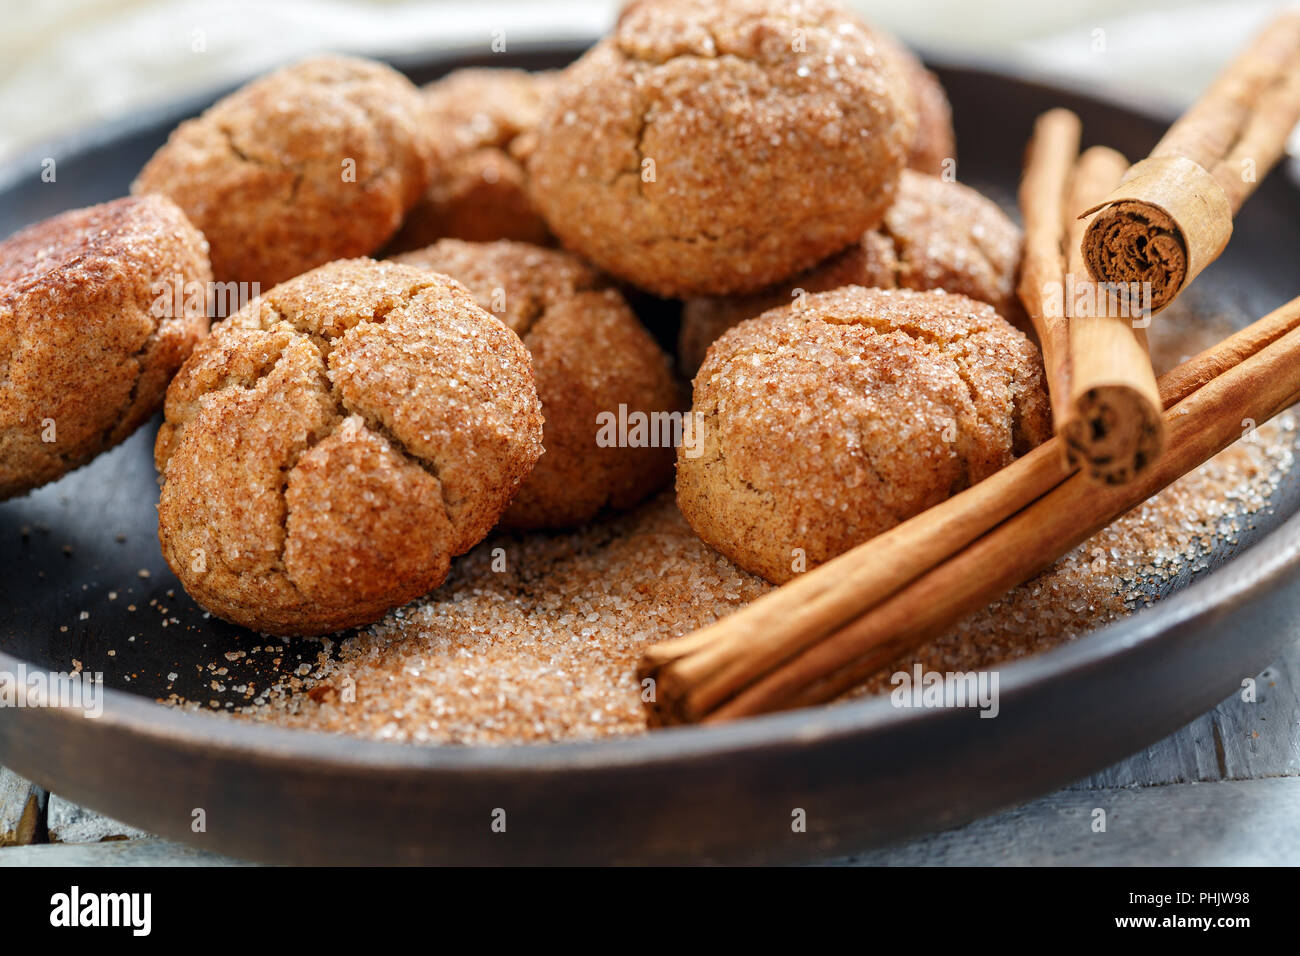 Cookies with cinnamon sugar on a wooden platter. Stock Photo